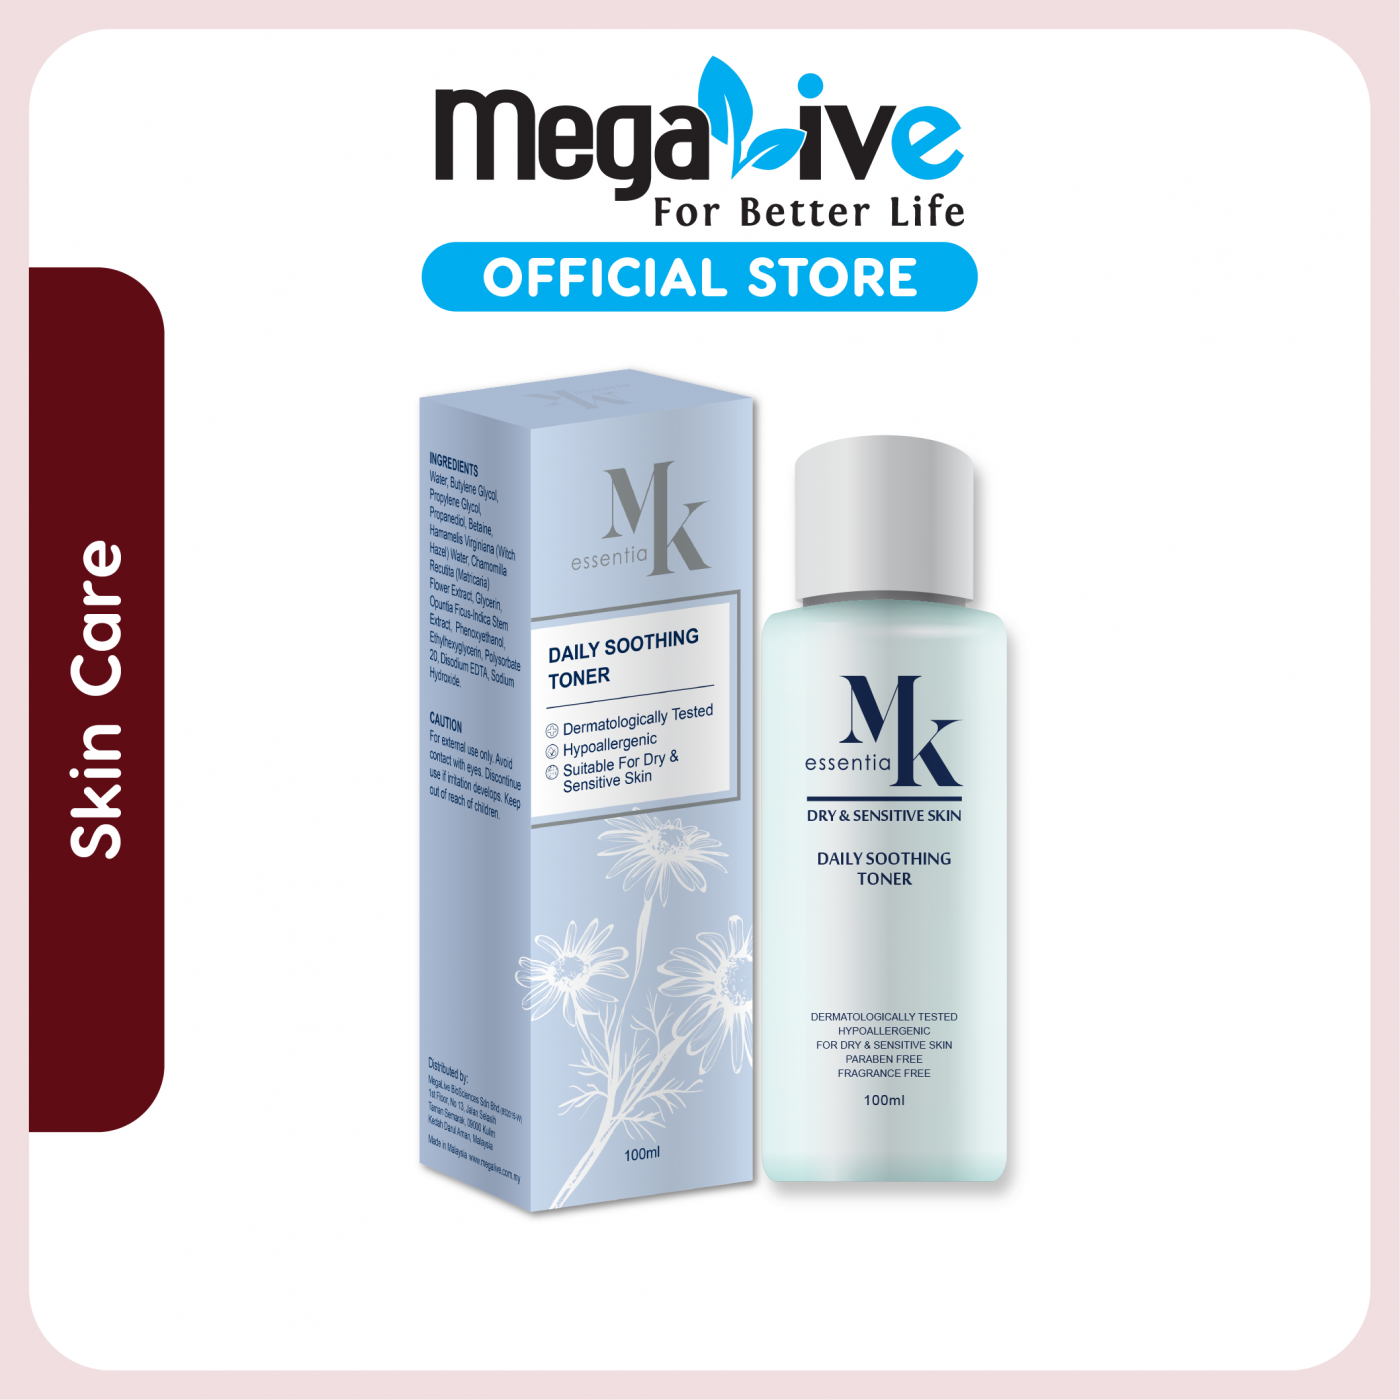 MK essentia Daily Soothing Toner